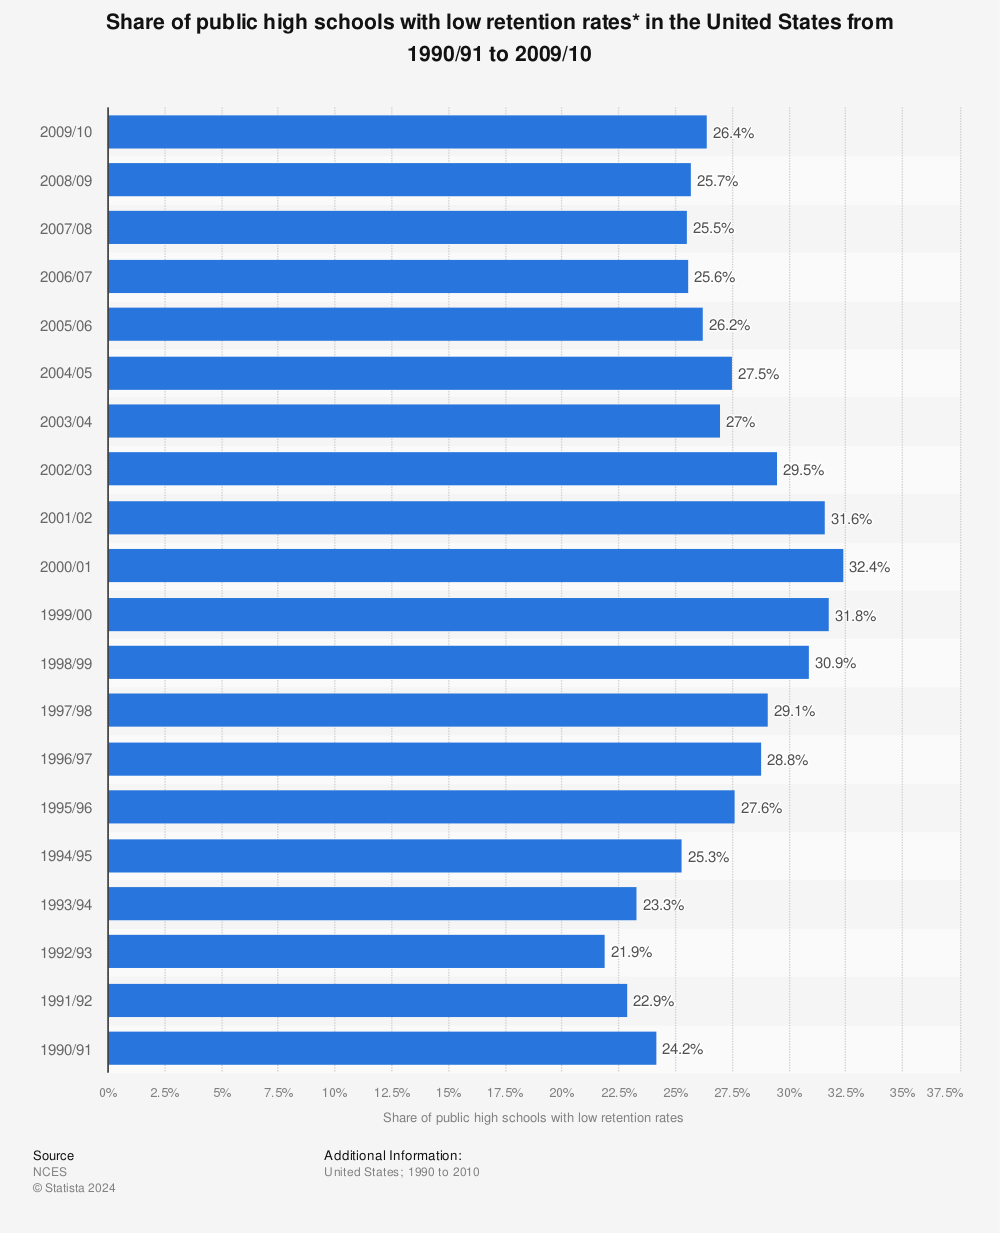 Statistic: Share of public high schools with low retention rates* in the United States from 1990/91 to 2009/10 | Statista